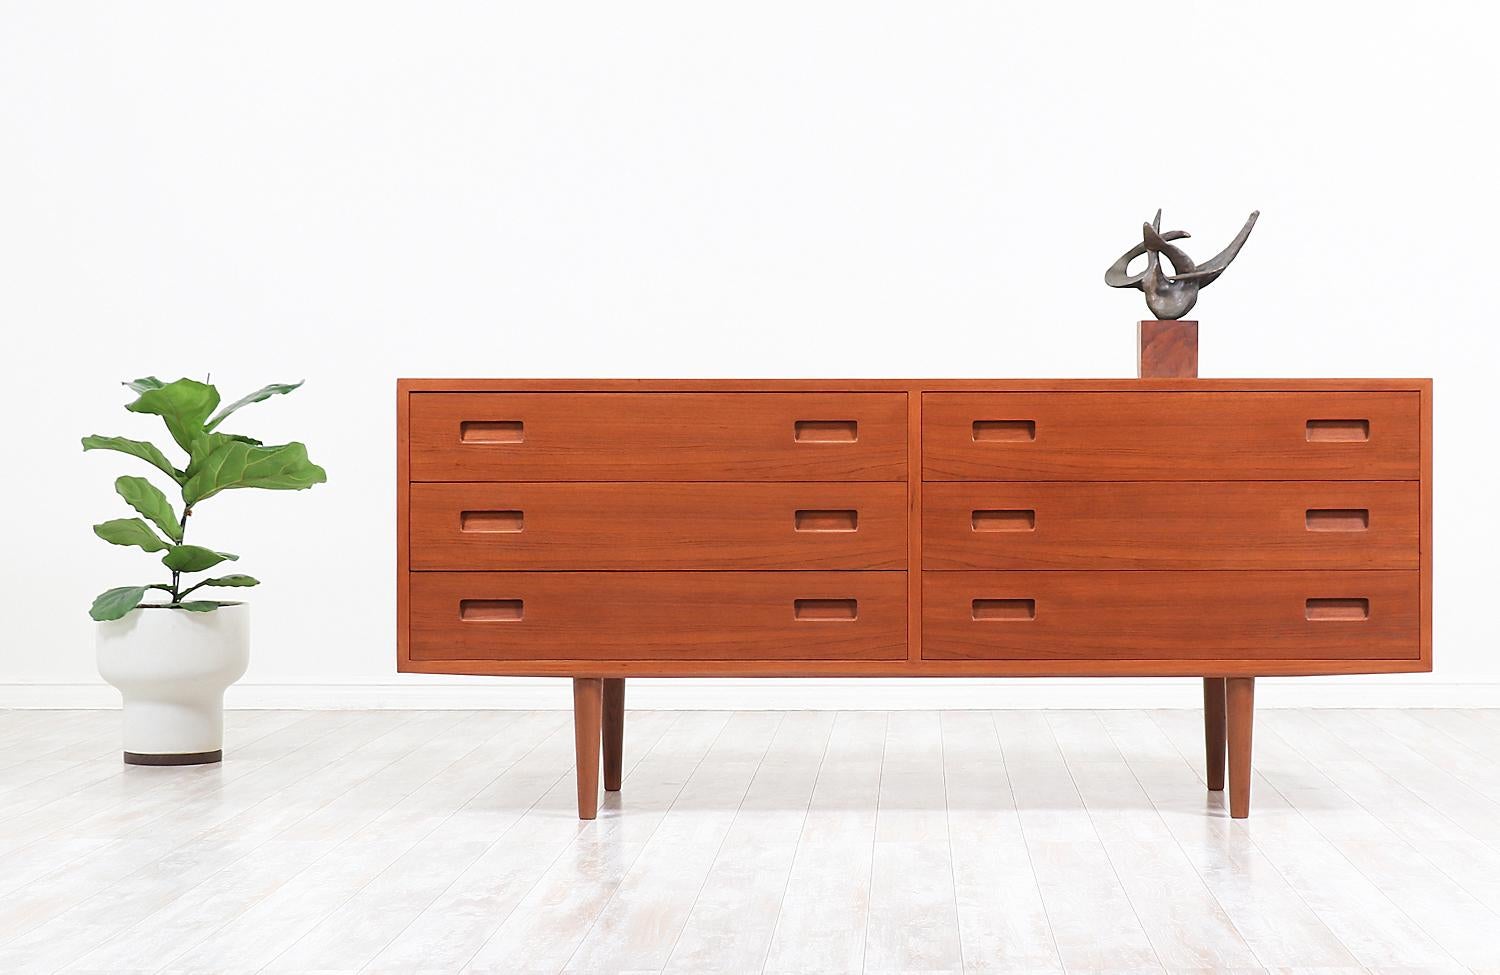 Elegant dresser designed and manufactured in Denmark, circa 1950s. This Classic vintage Danish modern design features six spacious dovetail drawers with recessed pulls and teak grain detail throughout. Delicately crafted with teak wood and sitting